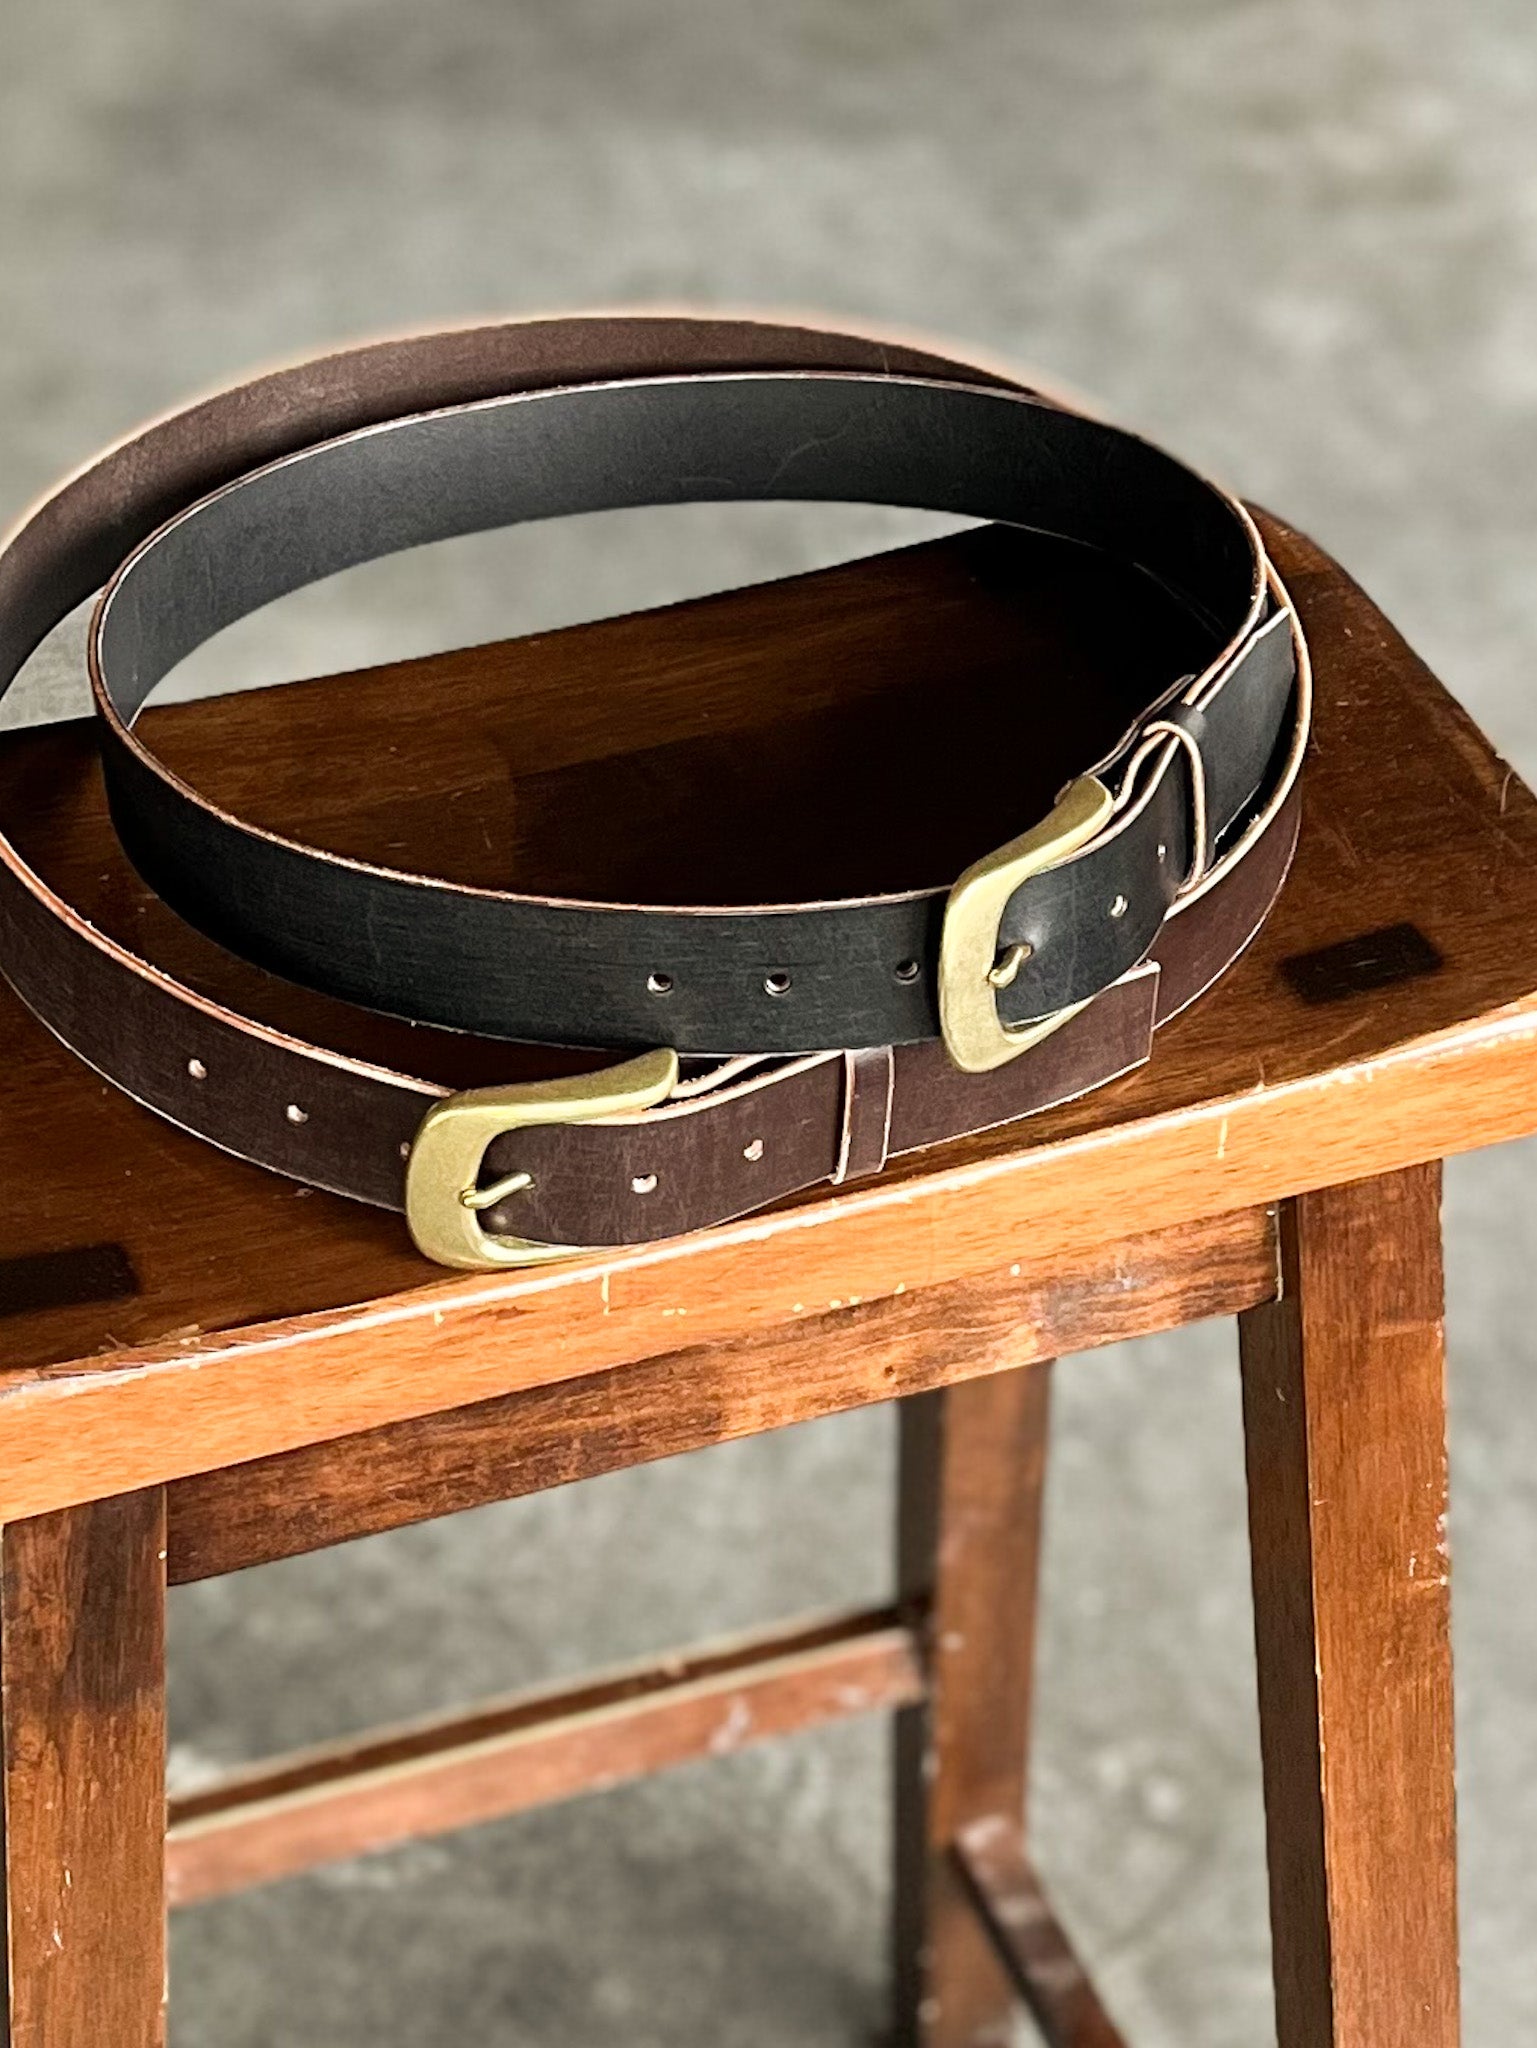 modjūl premium leather belts in black and coffee, stacked. Handmade in Canada using Italian leather and quality hardware.